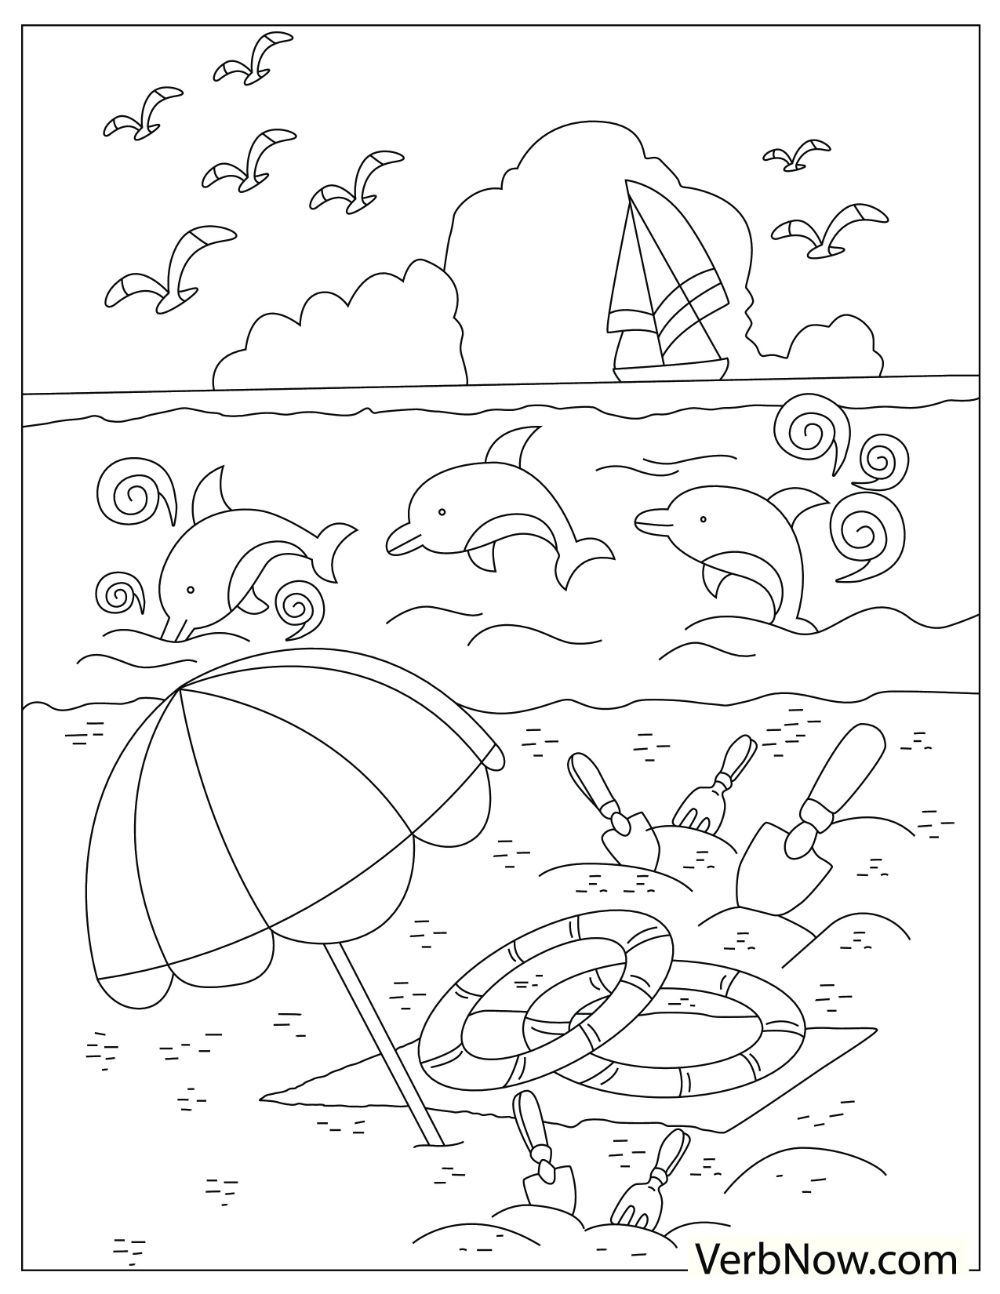 Free BEACH Coloring Pages for Download (Printable PDF) - VerbNow